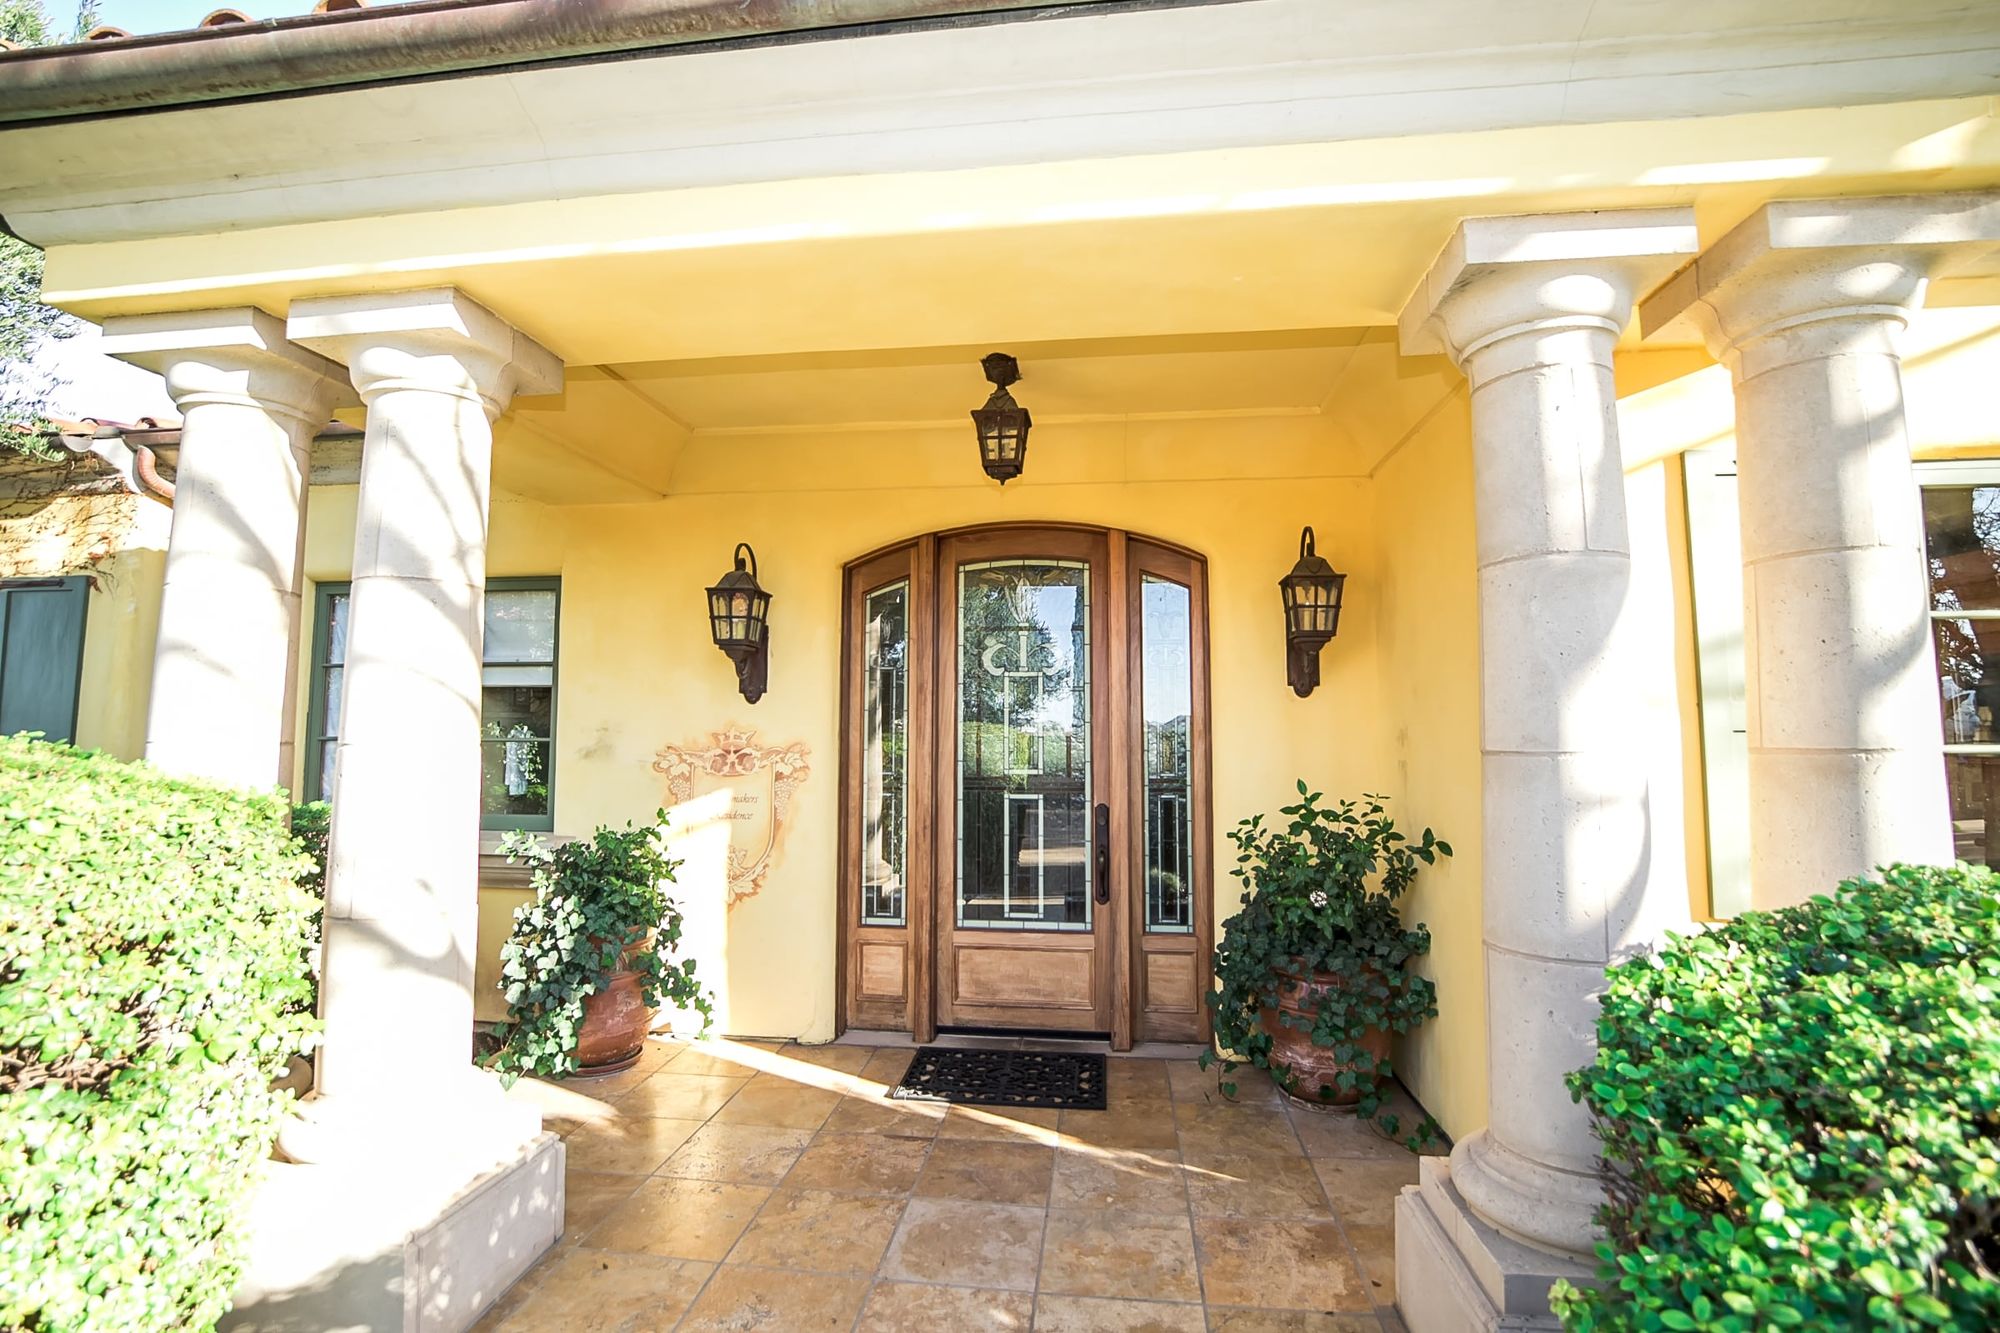 Front door with lighting and columns on either side